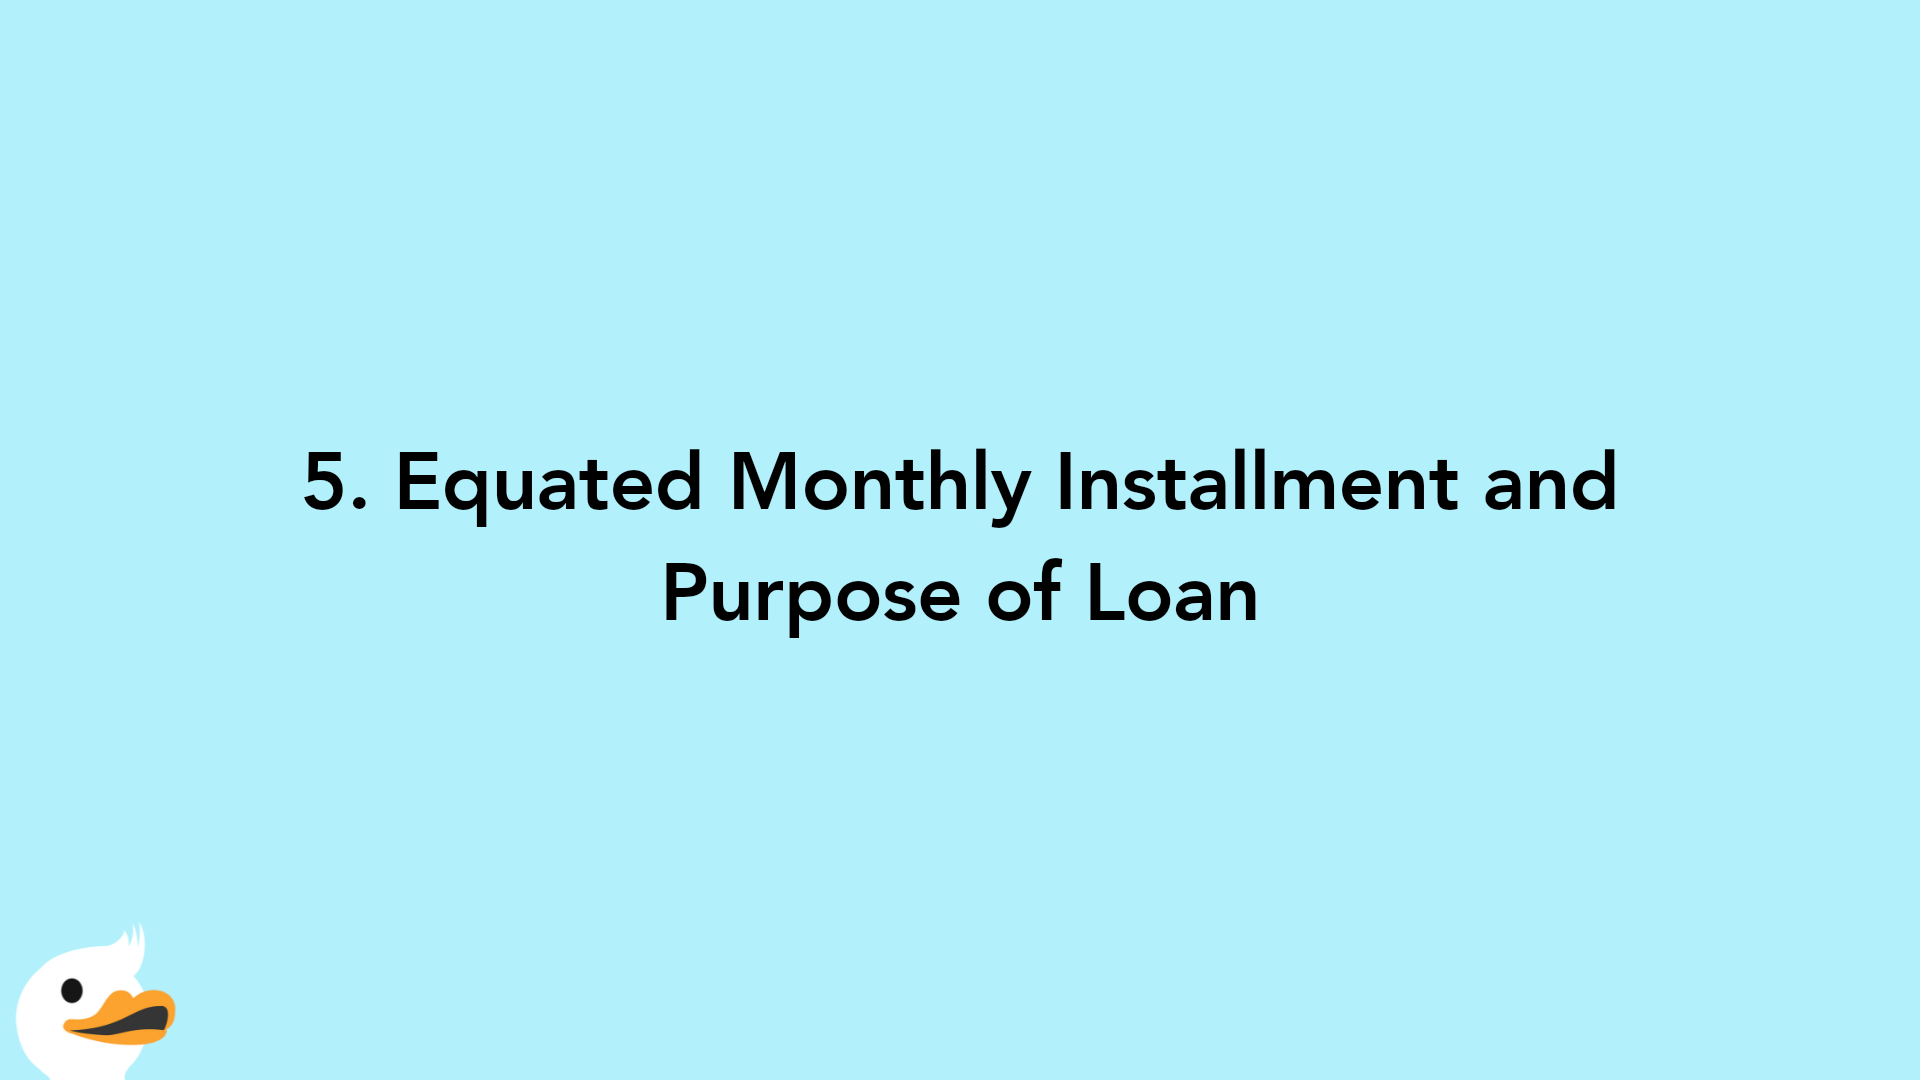 5. Equated Monthly Installment and Purpose of Loan